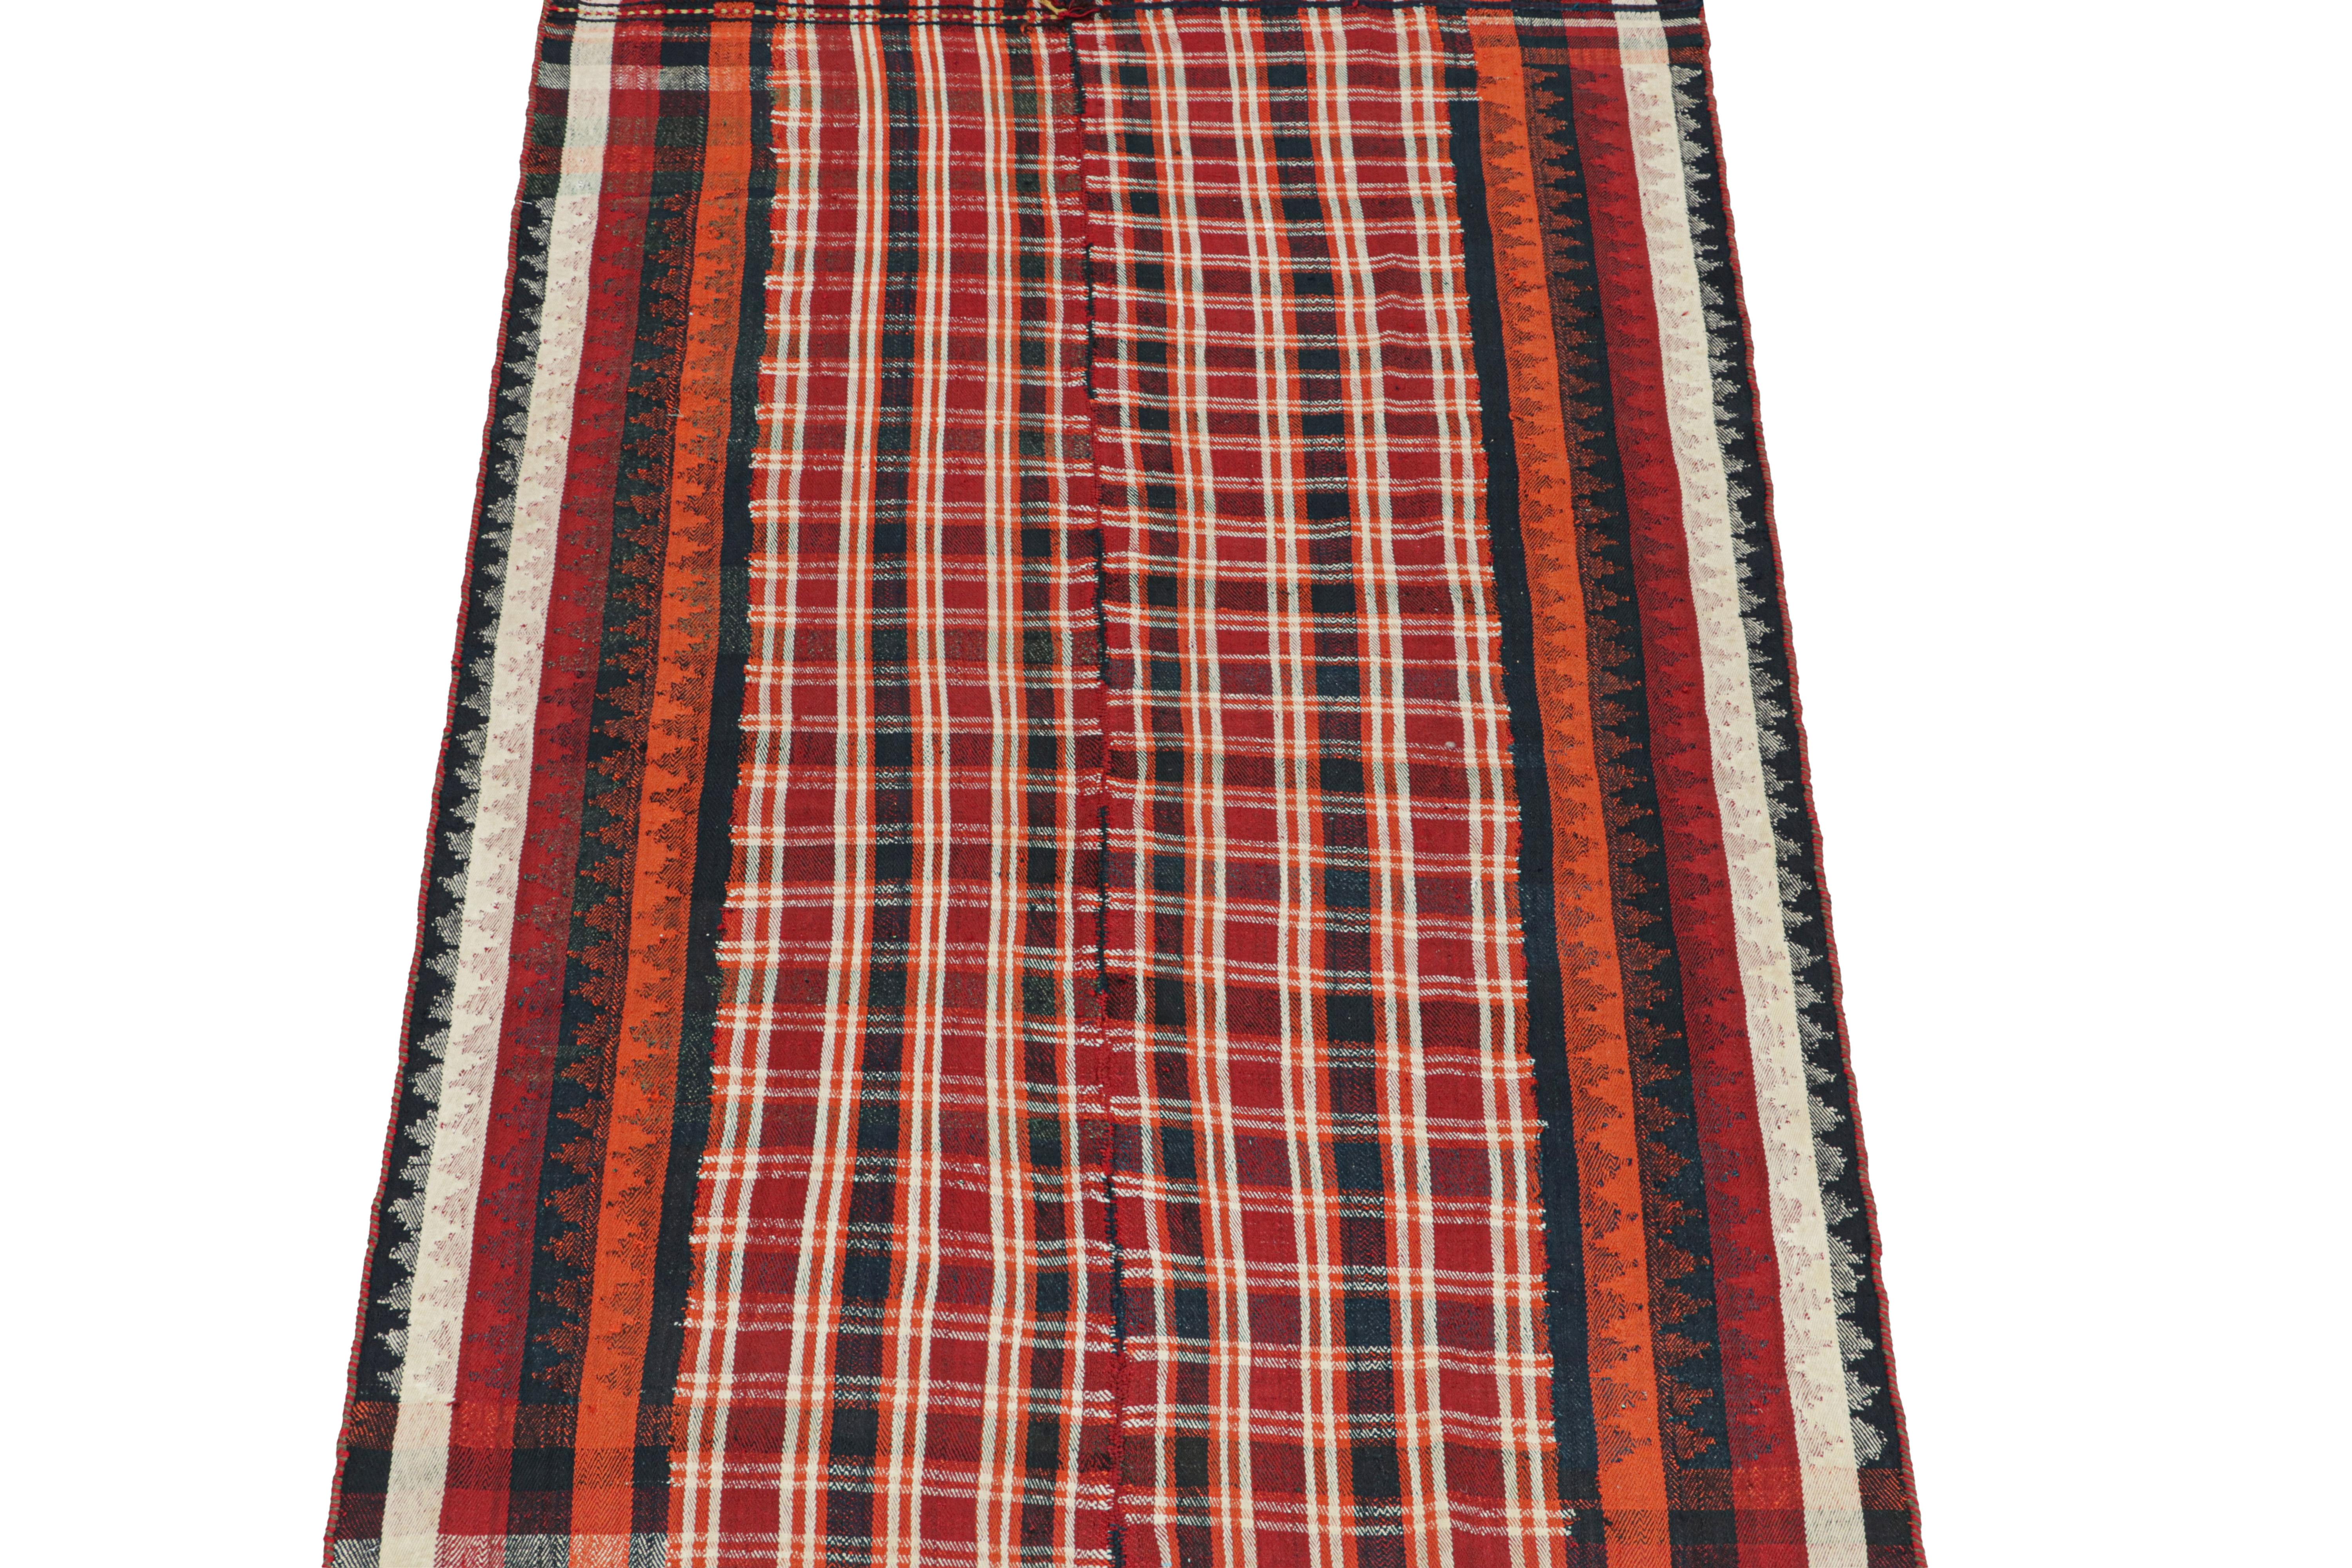 This vintage 5x8 Persian tribal kilim is handwoven in wool, and originates circa 1950-1960.

This design remarks the panel-weaving technique, in which tribal weavers combine multiple pieces into a larger Kilim. Its design enjoys a plaid geometric